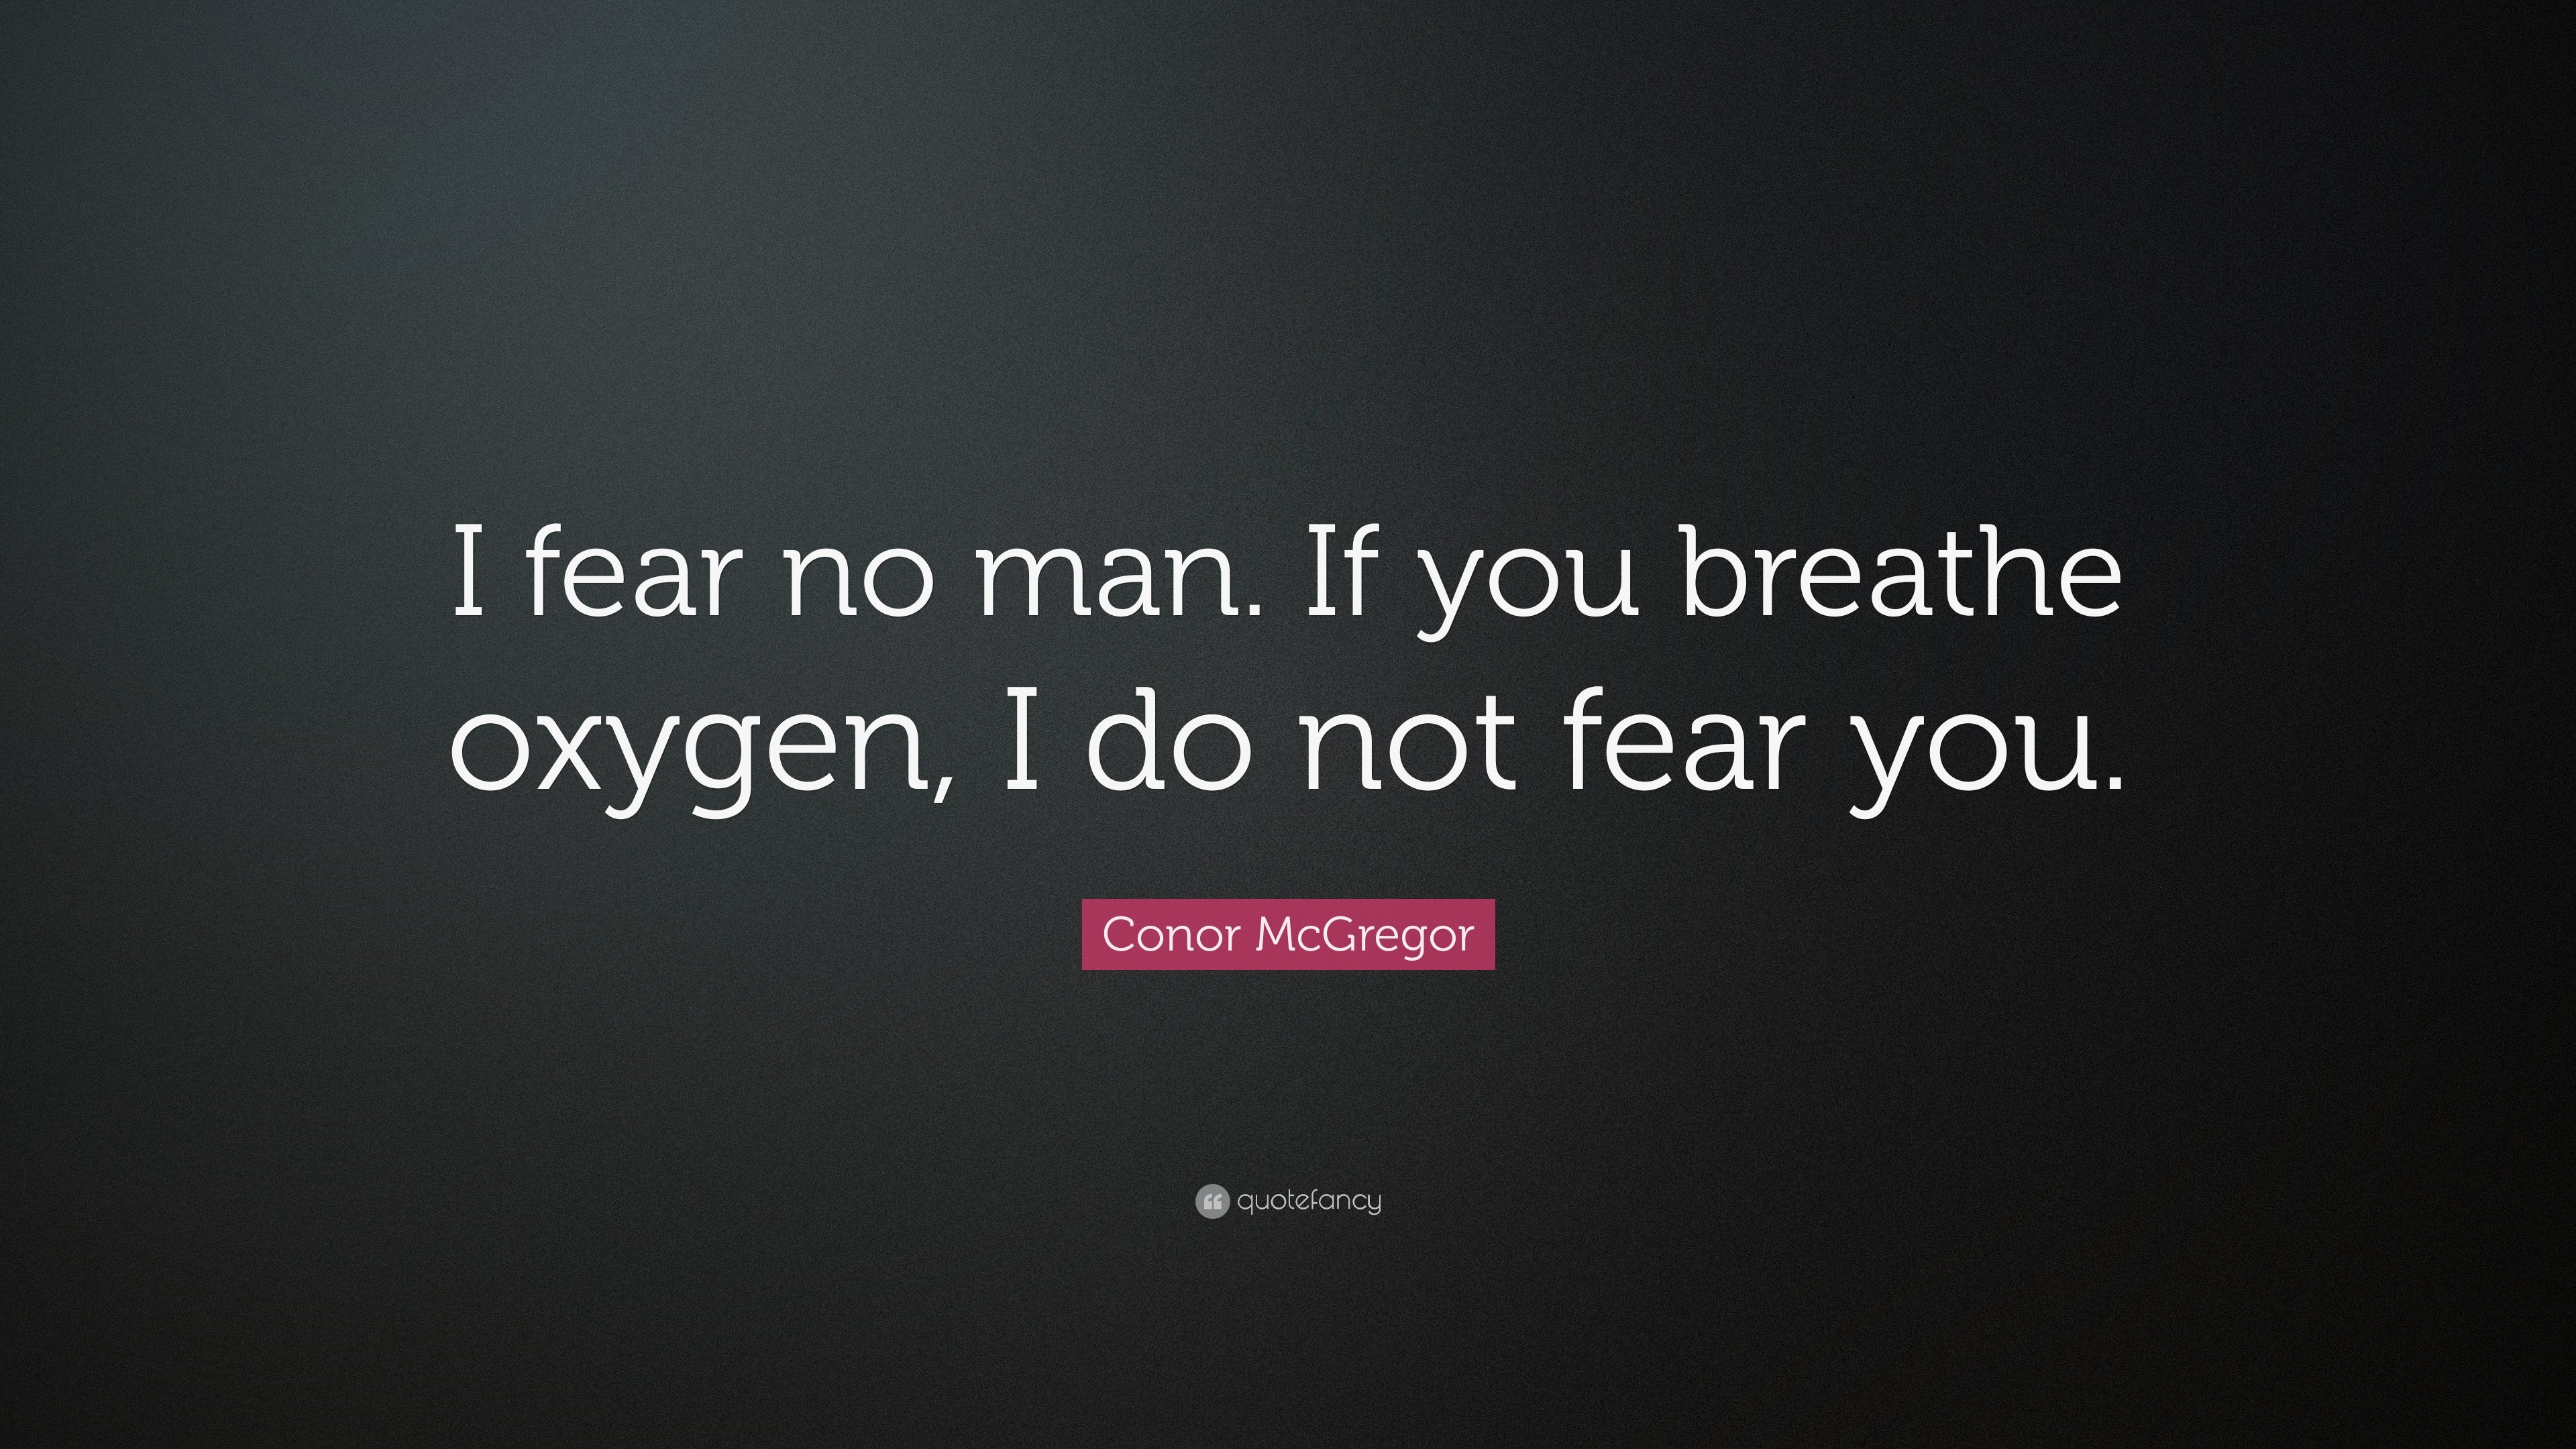 Conor McGregor Quotes Wallpapers (77+ pictures)